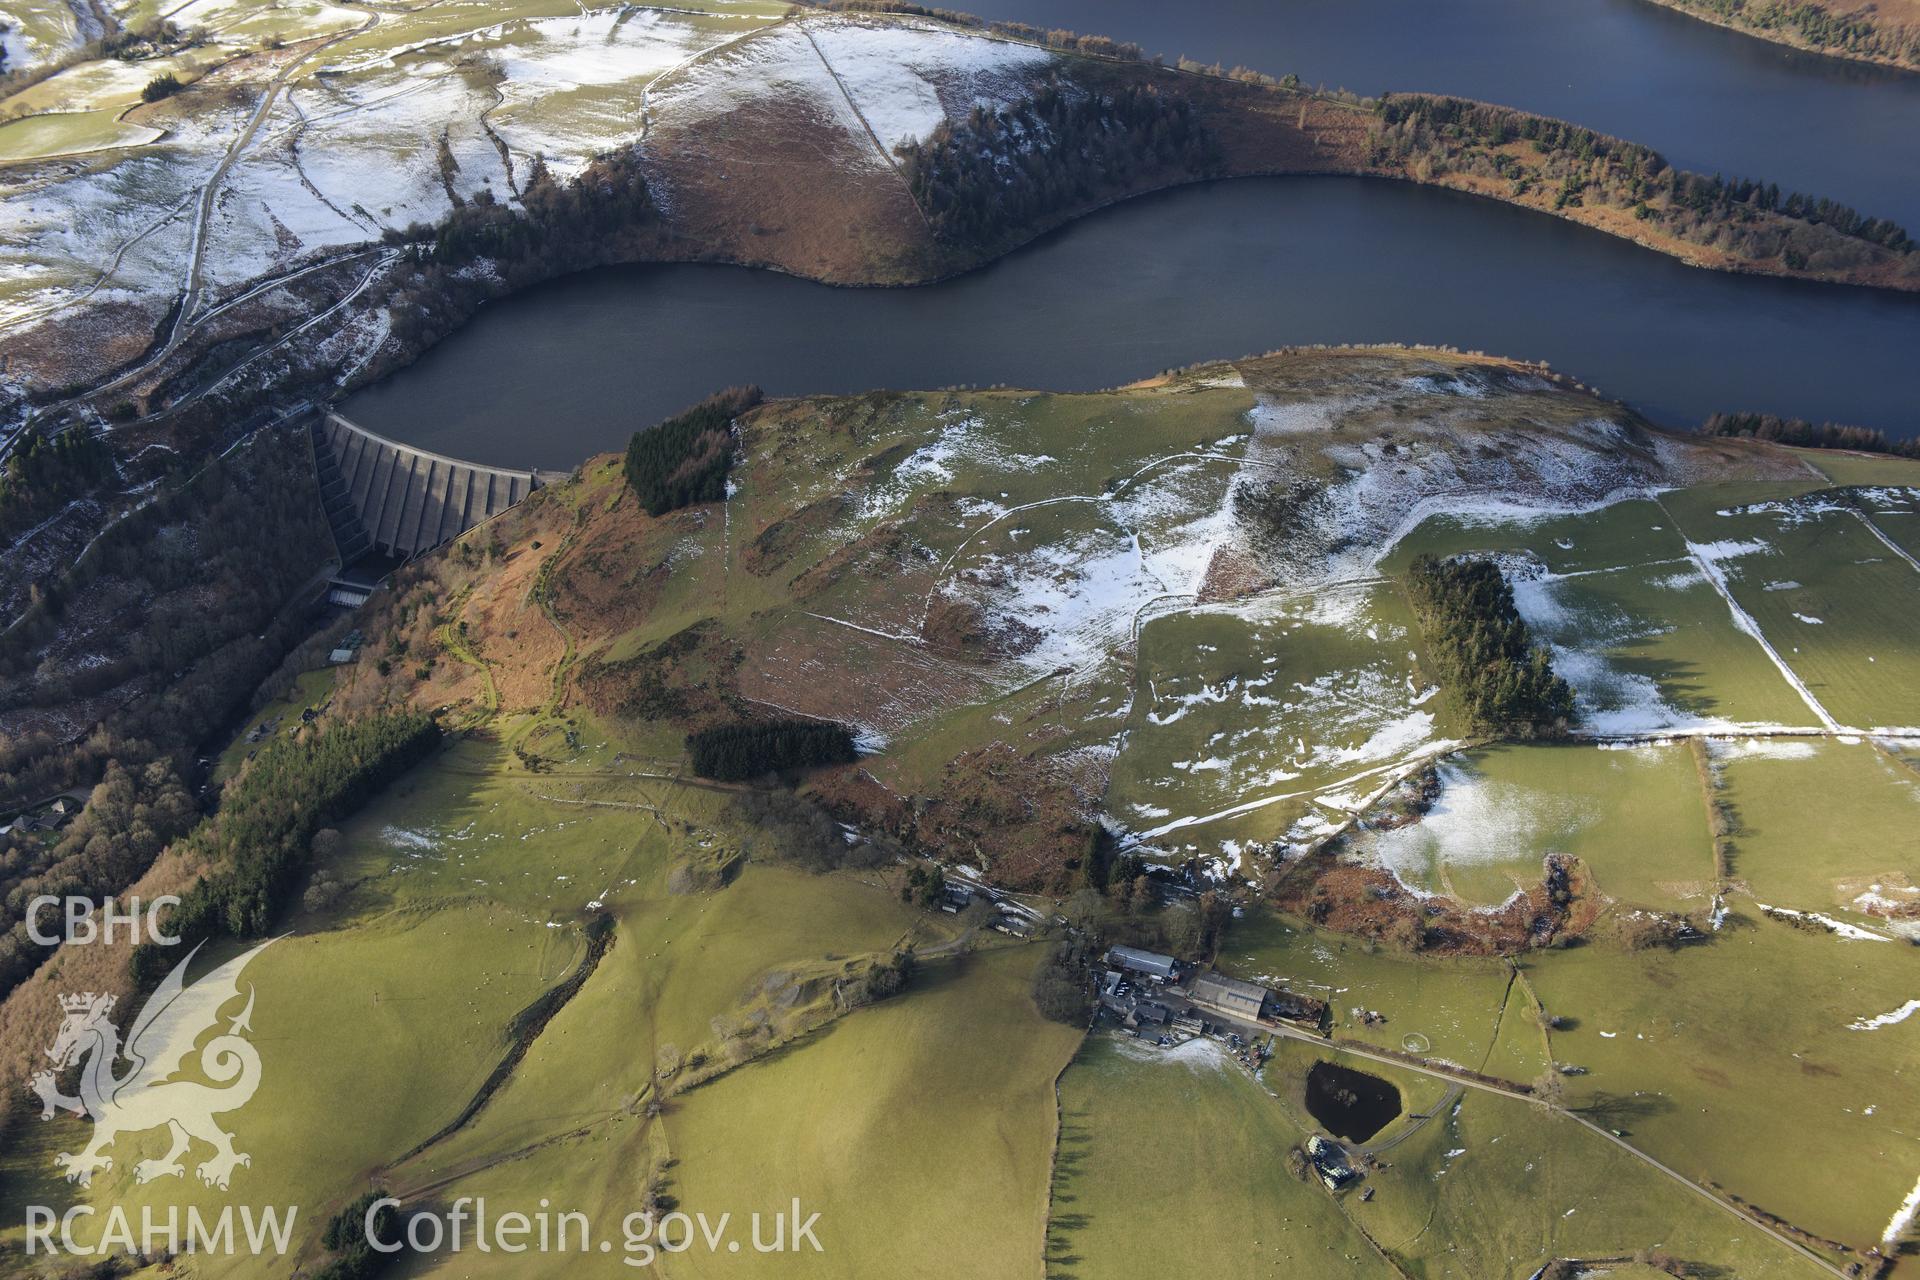 Llyn Clywedog dam and reservoir, Llanidloes. Oblique aerial photograph taken during the Royal Commission's programme of archaeological aerial reconnaissance by Toby Driver on 4th February 2015.